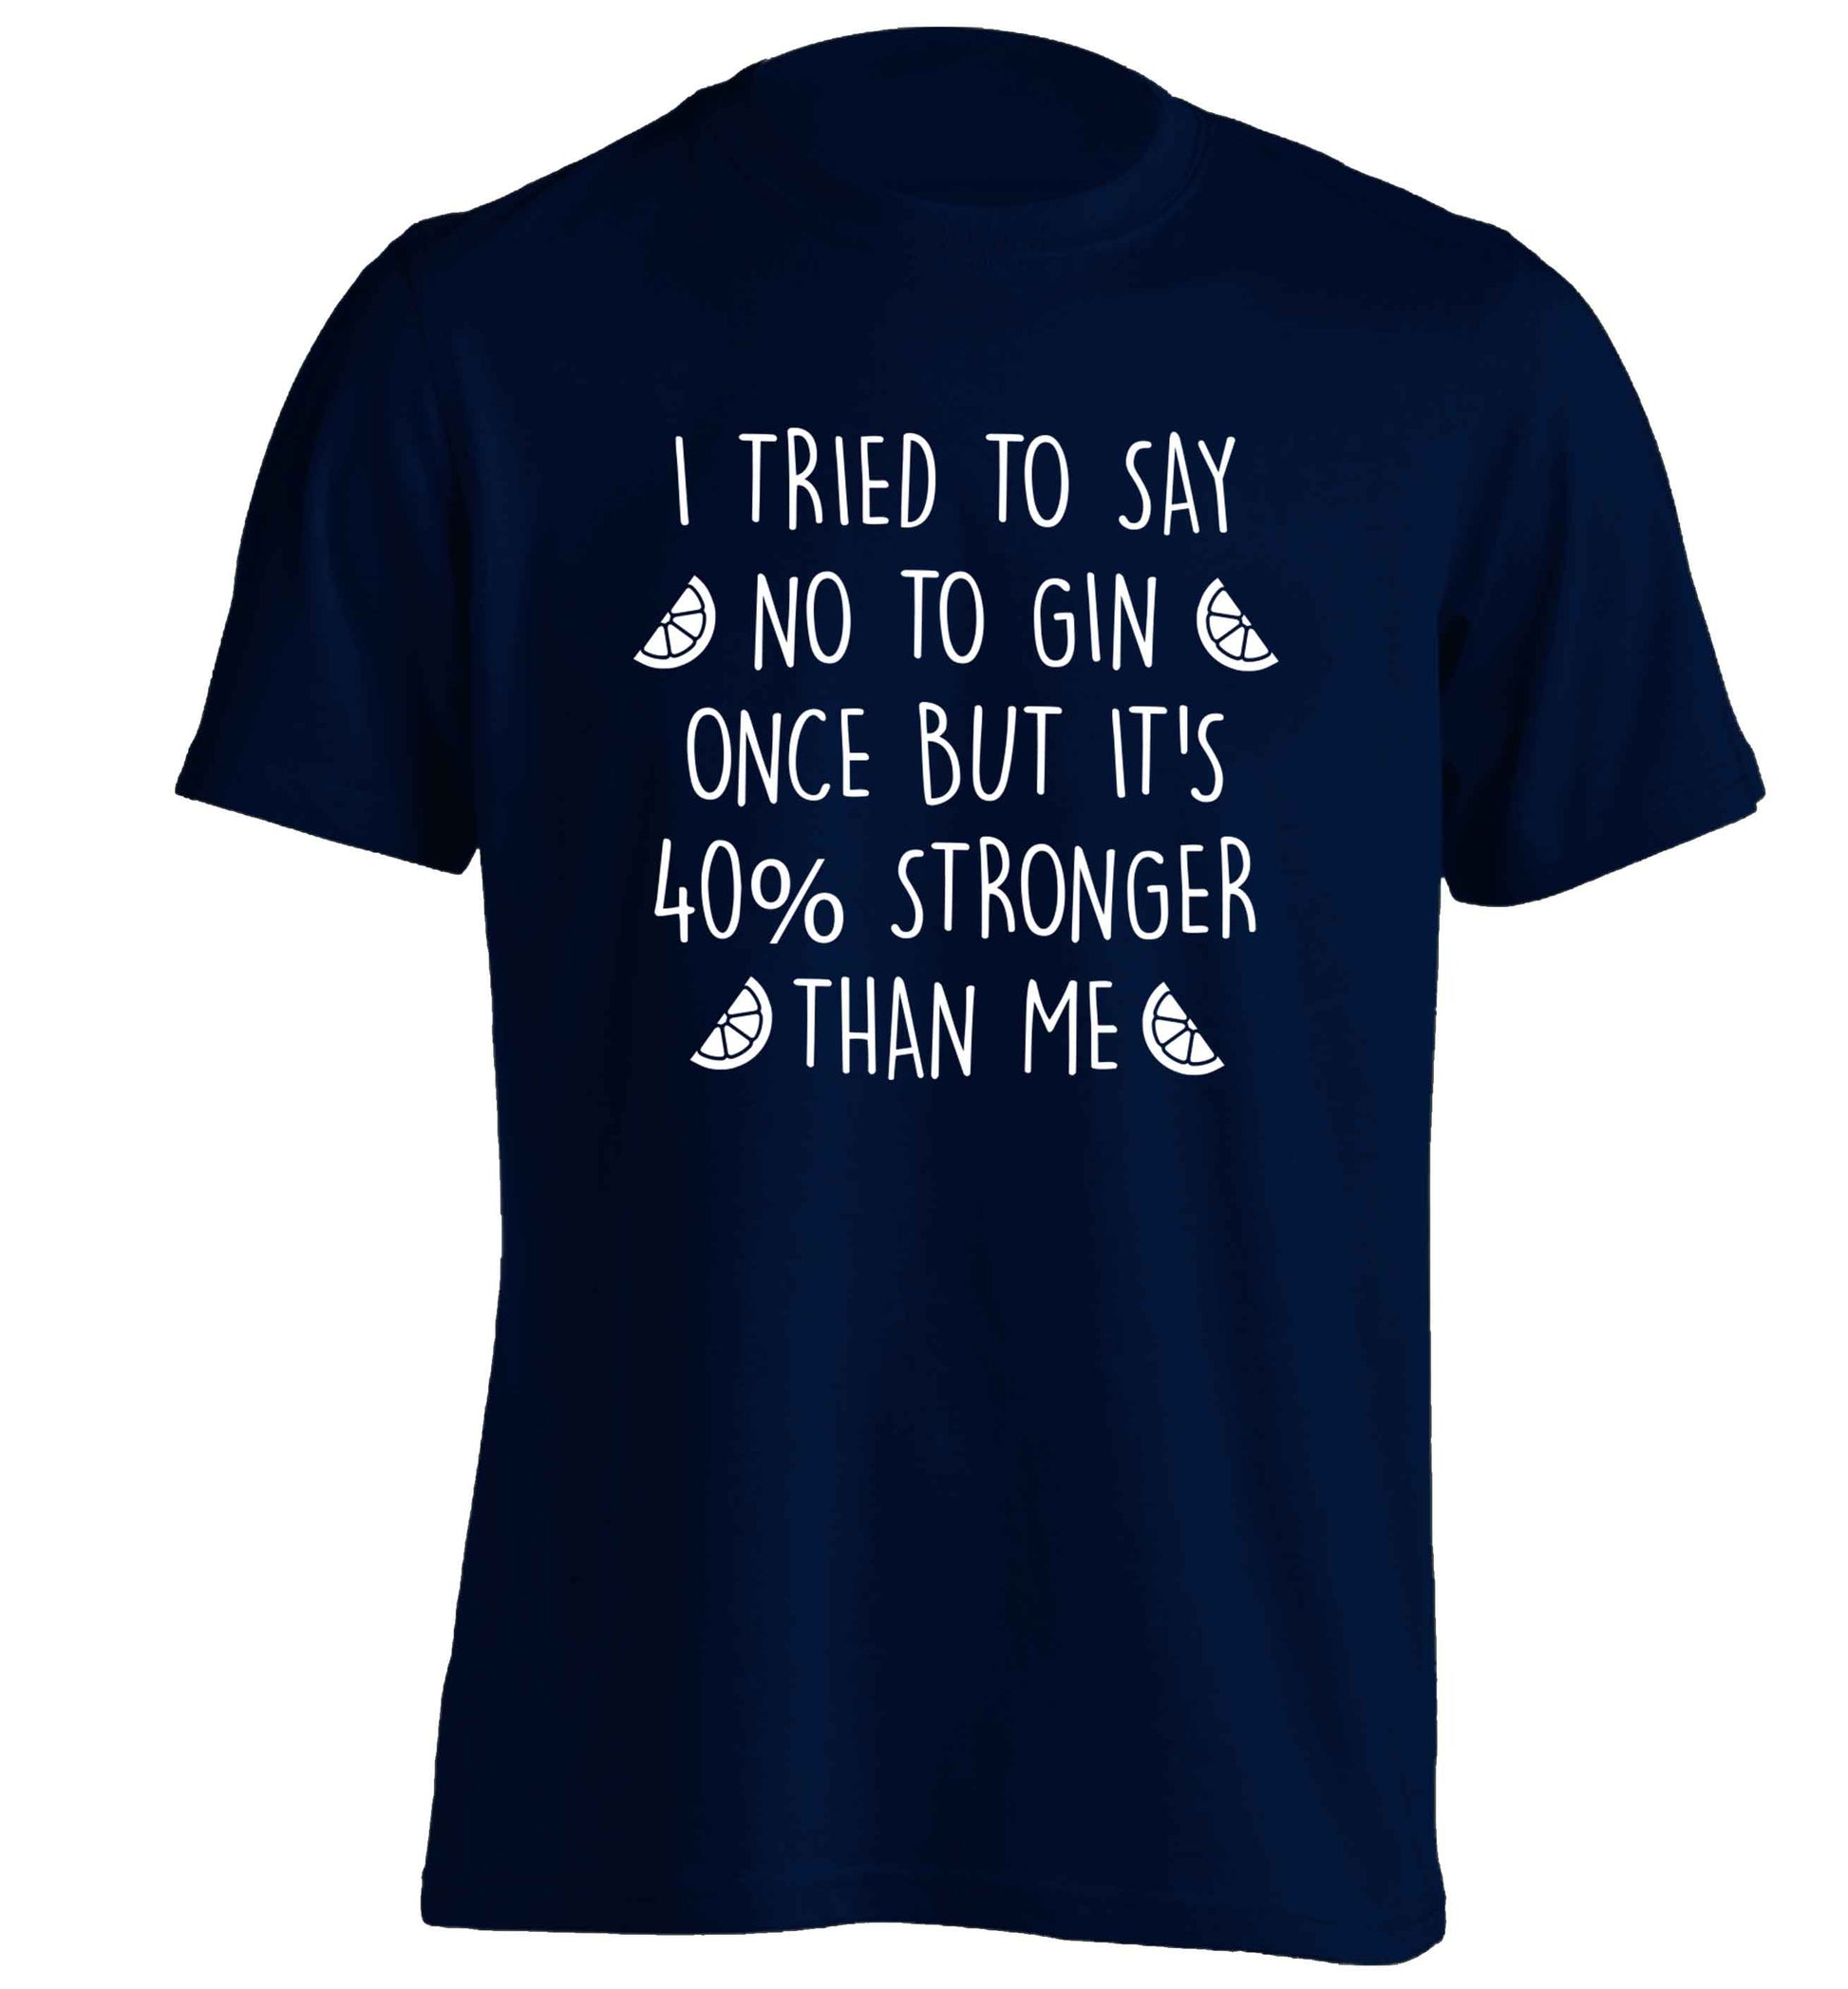 I tried to say no to gin once but it's 40% stronger than me adults unisex navy Tshirt 2XL